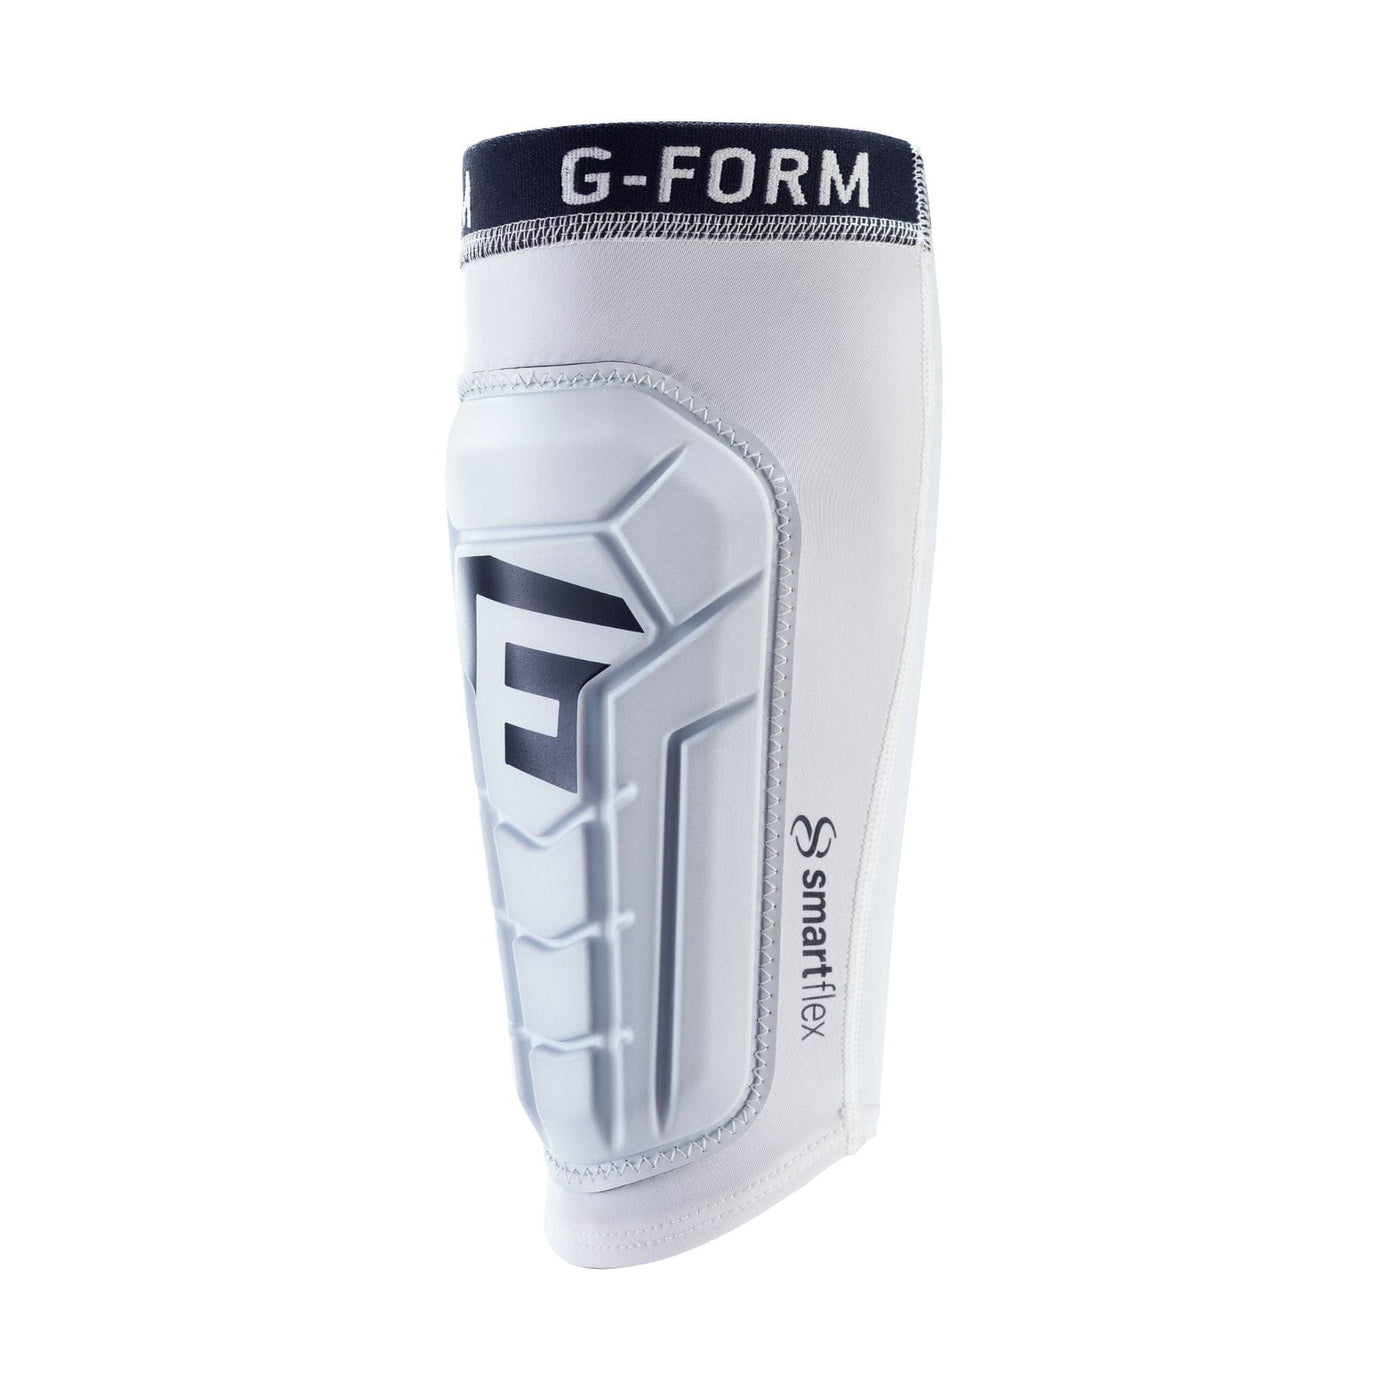 G-Form Youth Pro-S Vento Shin Guards - White 8Lines Shop - Fast Shipping